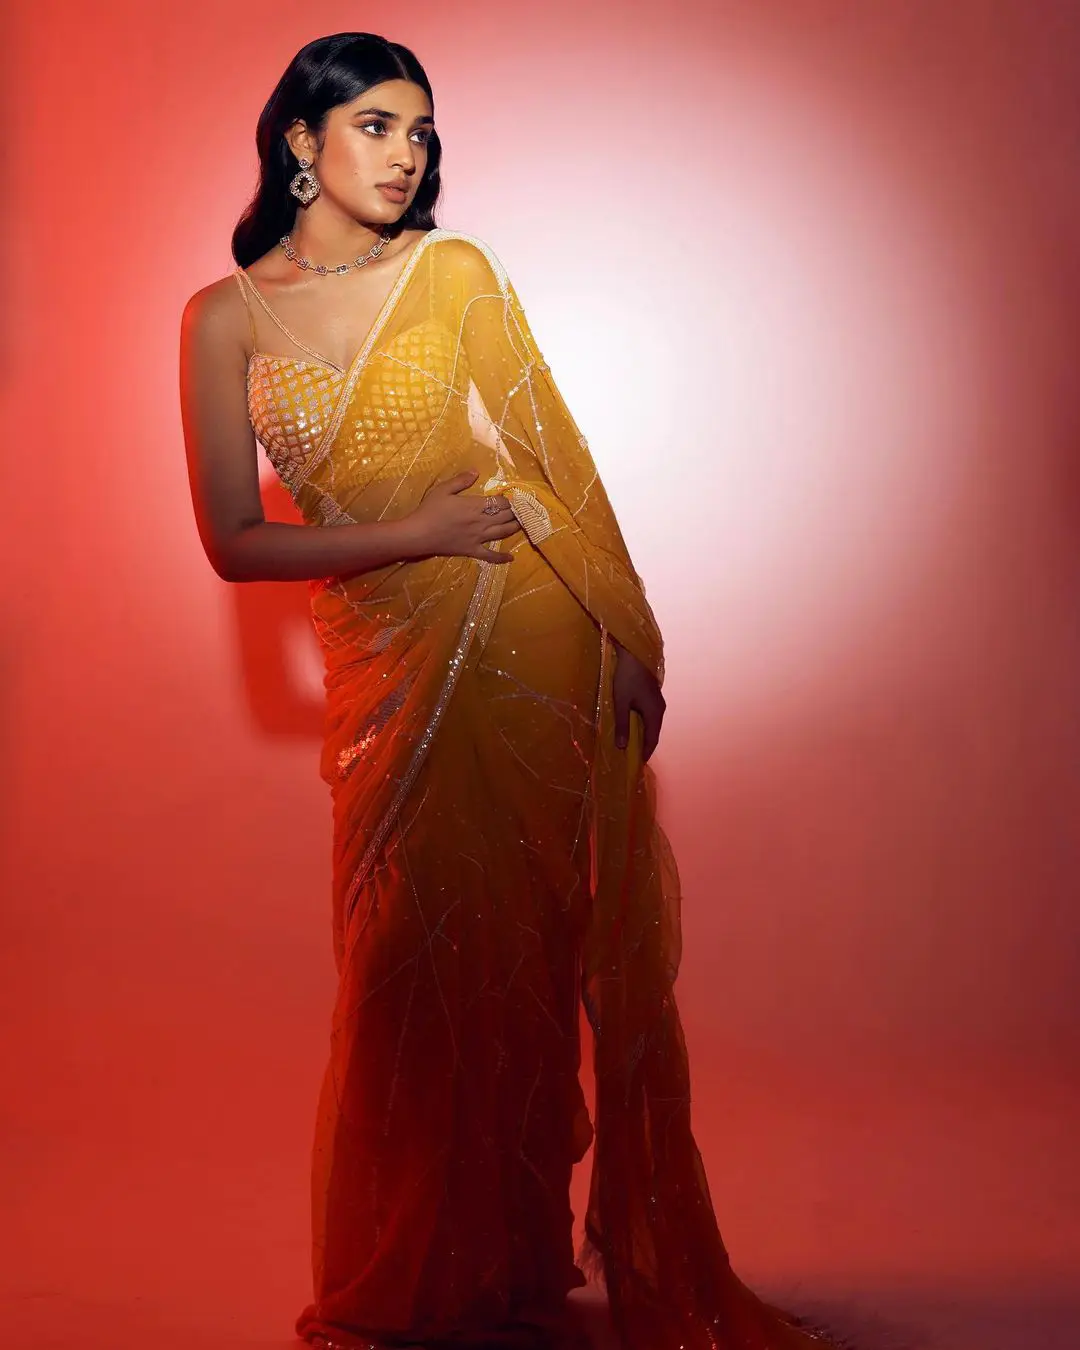 Krithi Shetty shines with Saree in Latest Photo Shoot